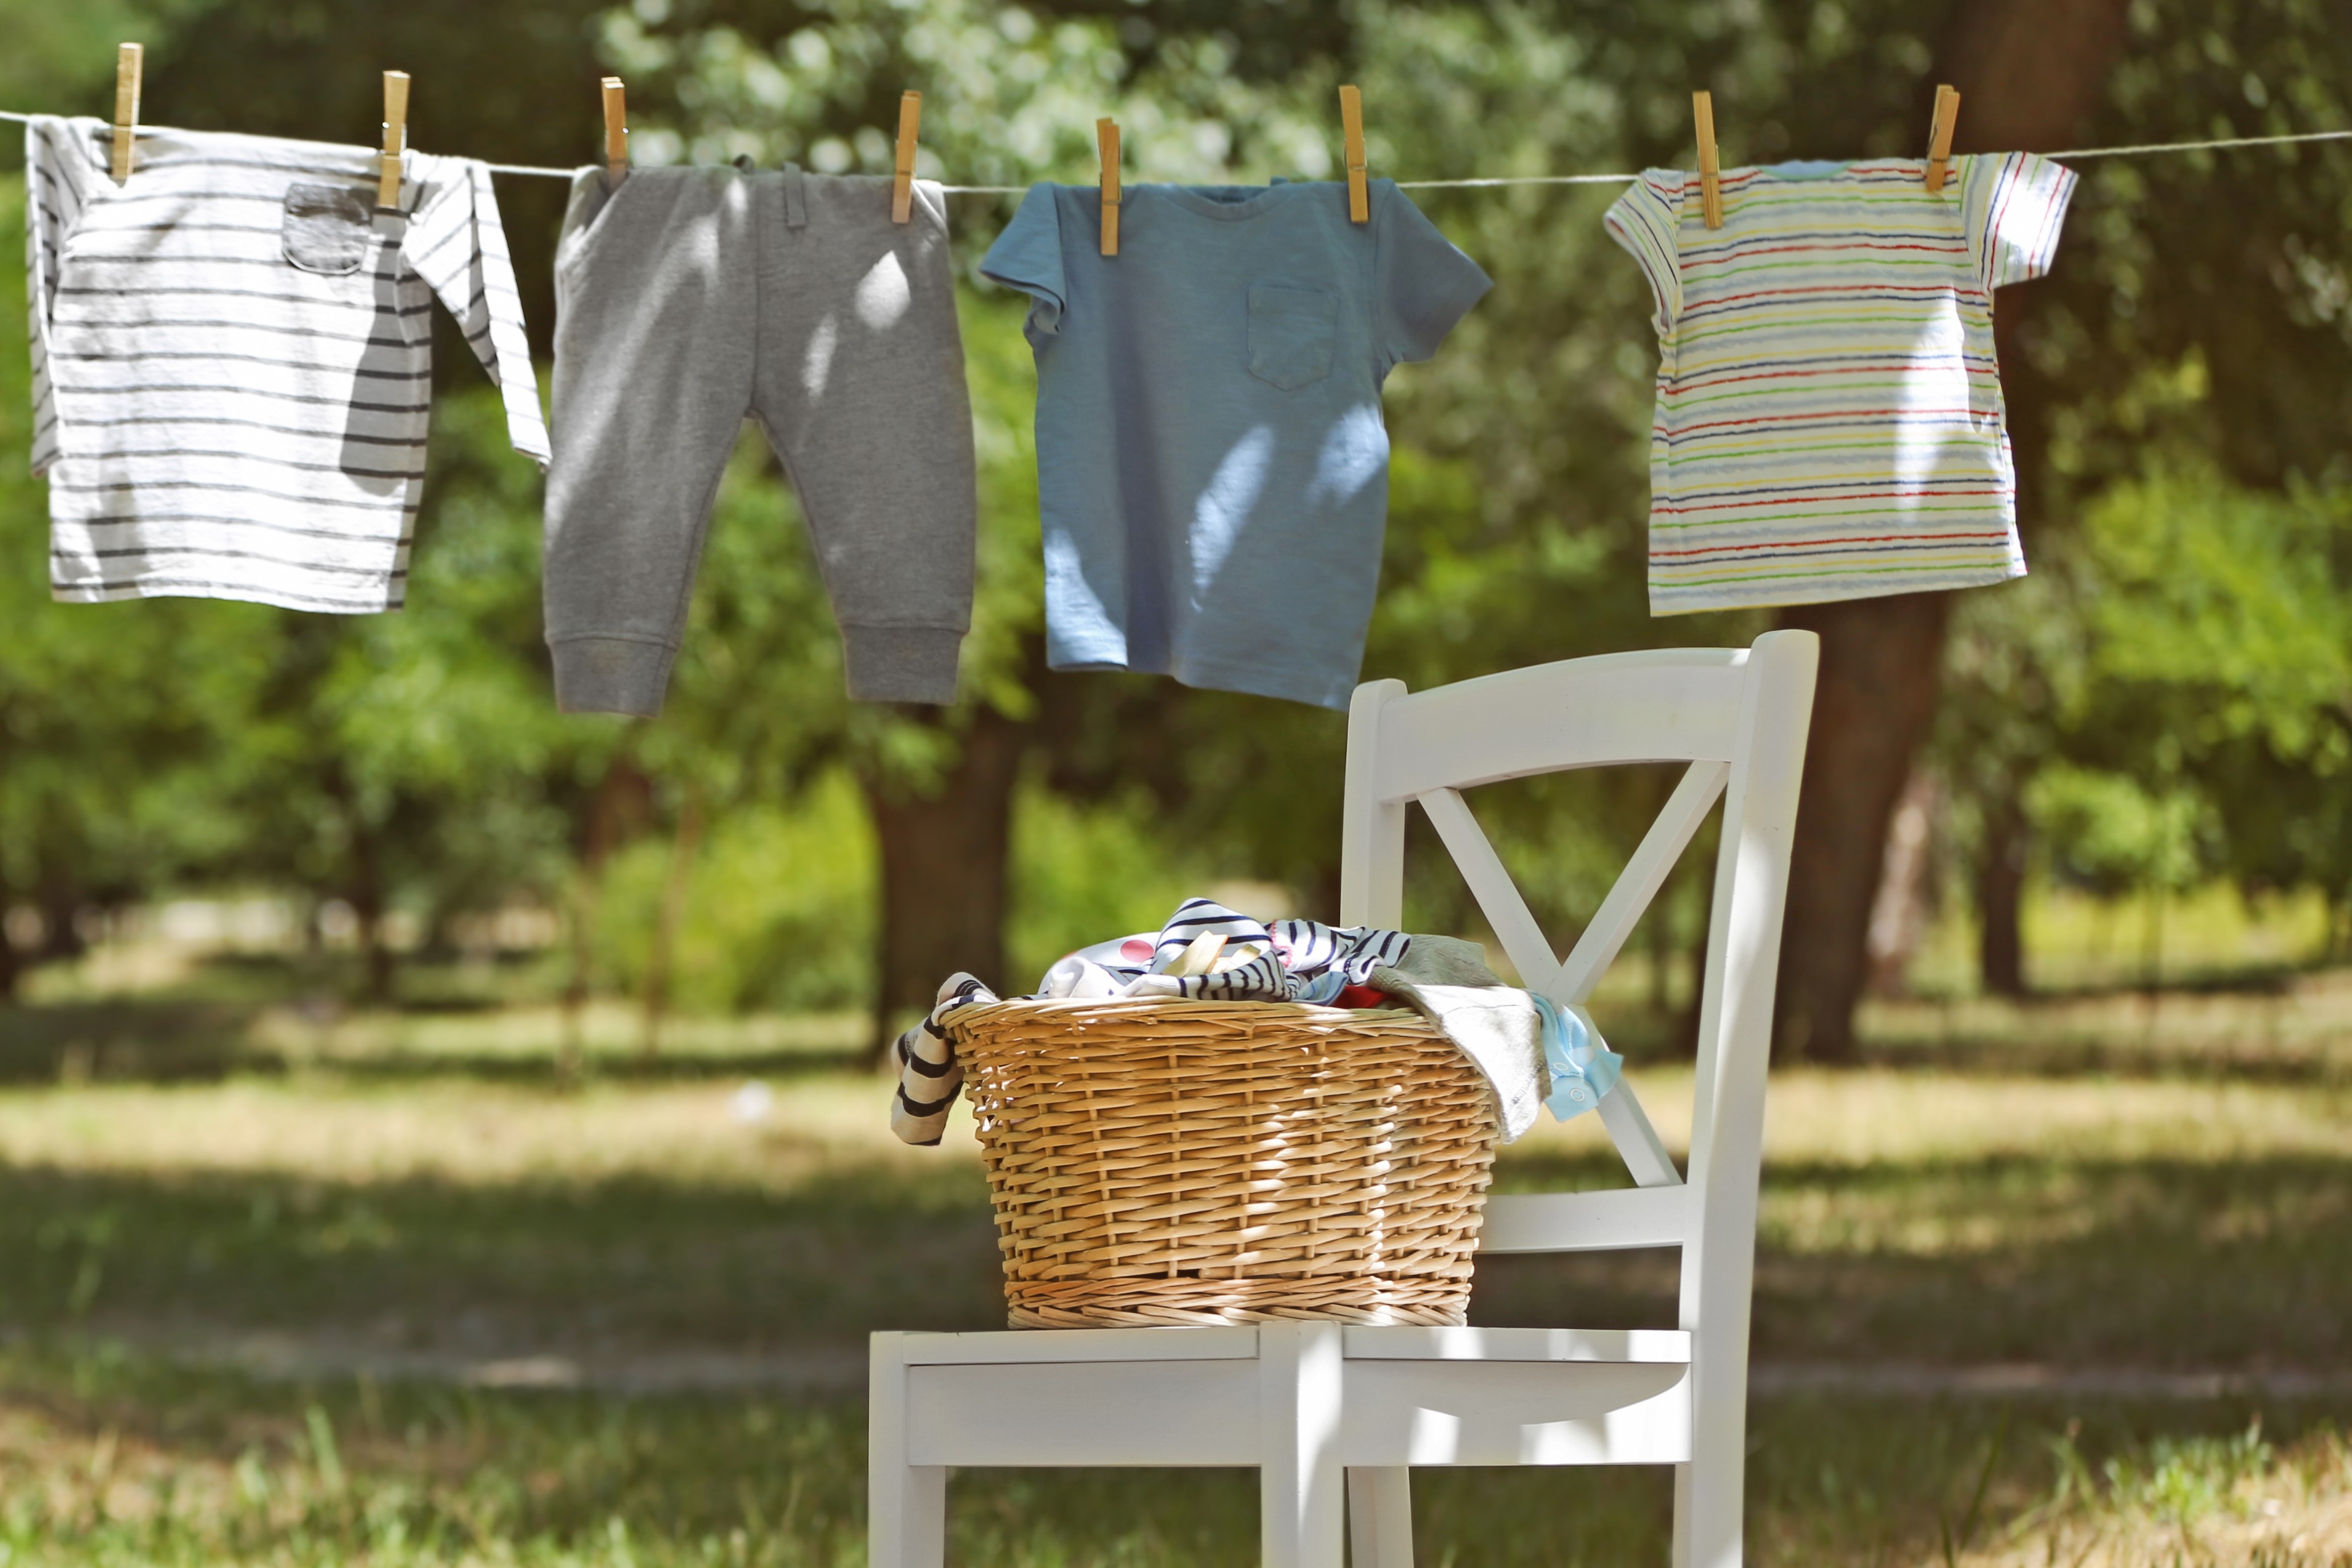 clothes drying on a line next to a white chair and wicker basket